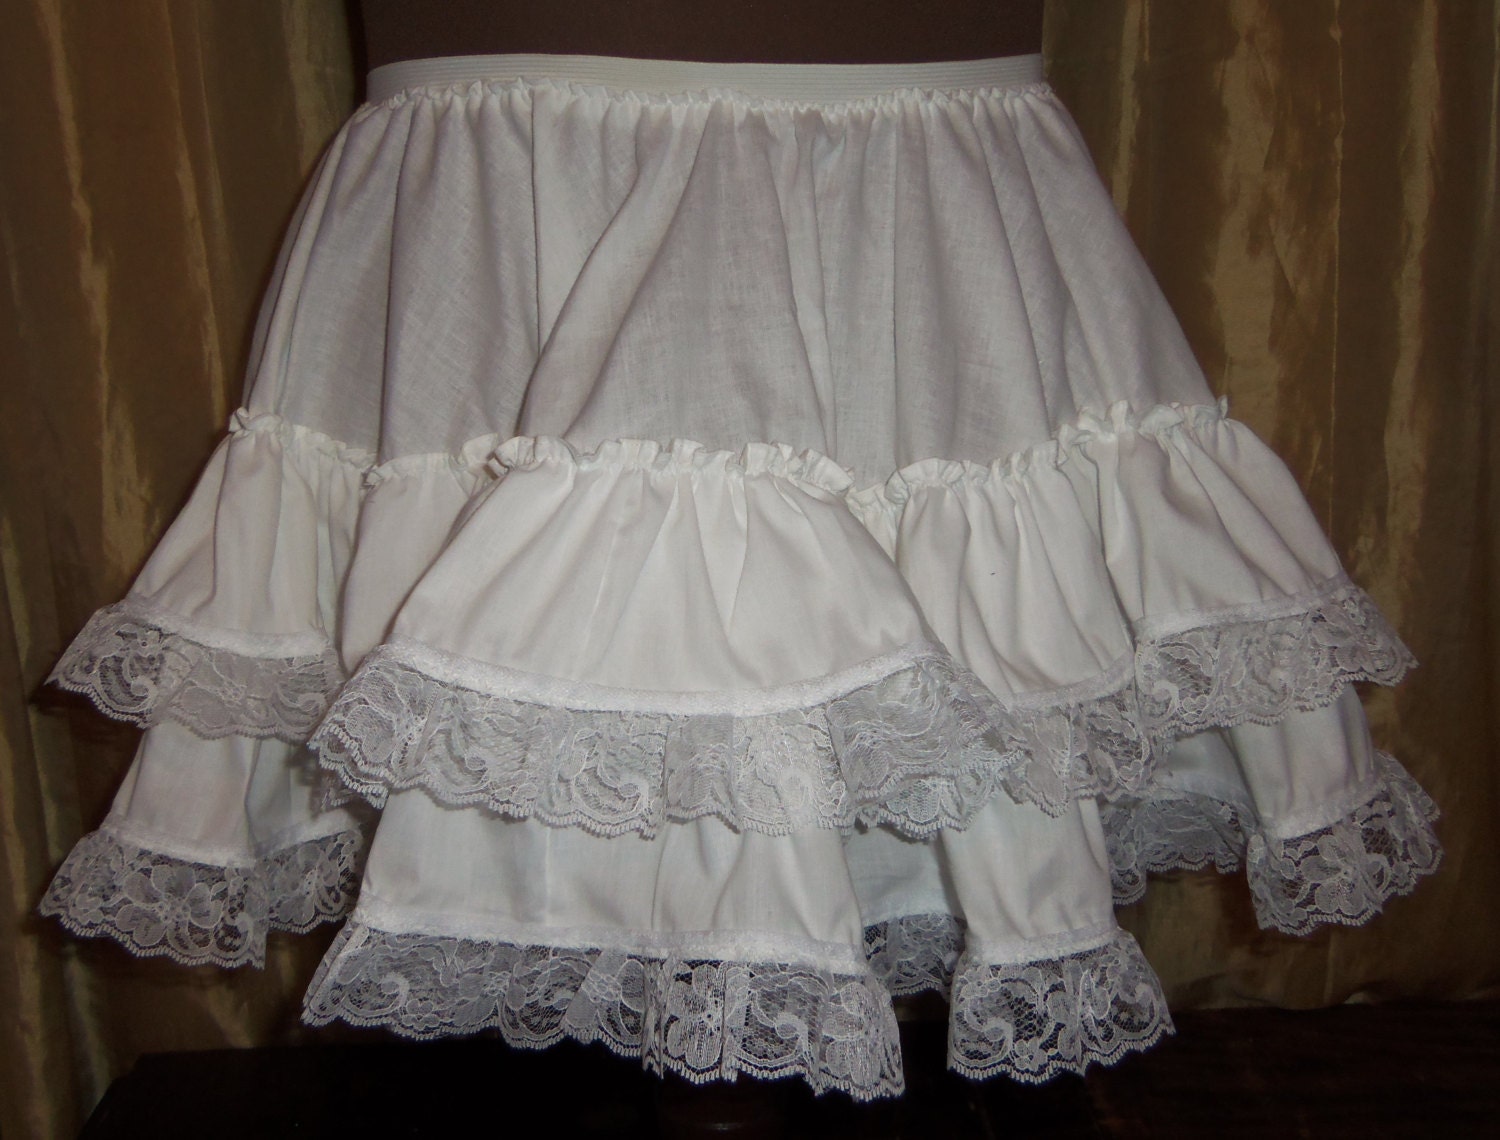 White Lace Under Skirt Petticoat Great for Pirate Rockabilly